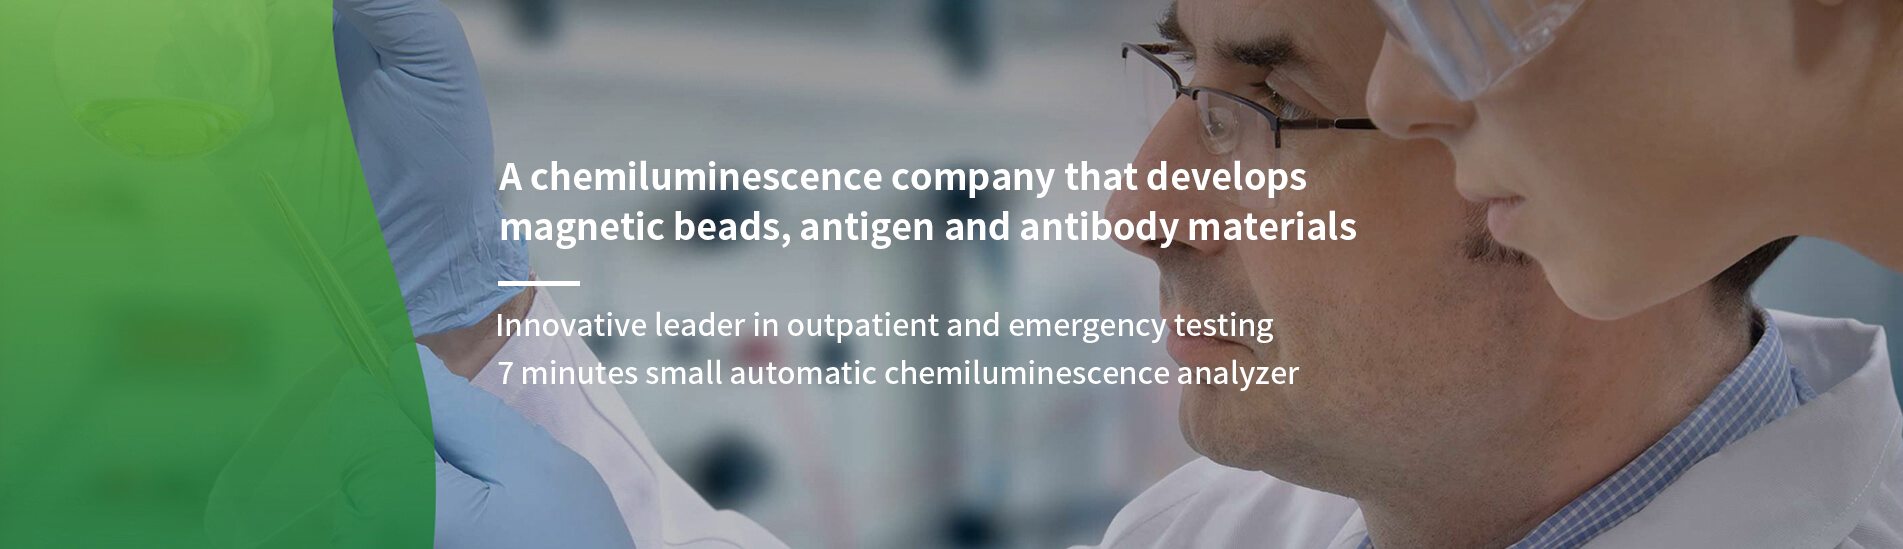 A chemiluminescence company that develops magnetic beads, antigen and antibody materials